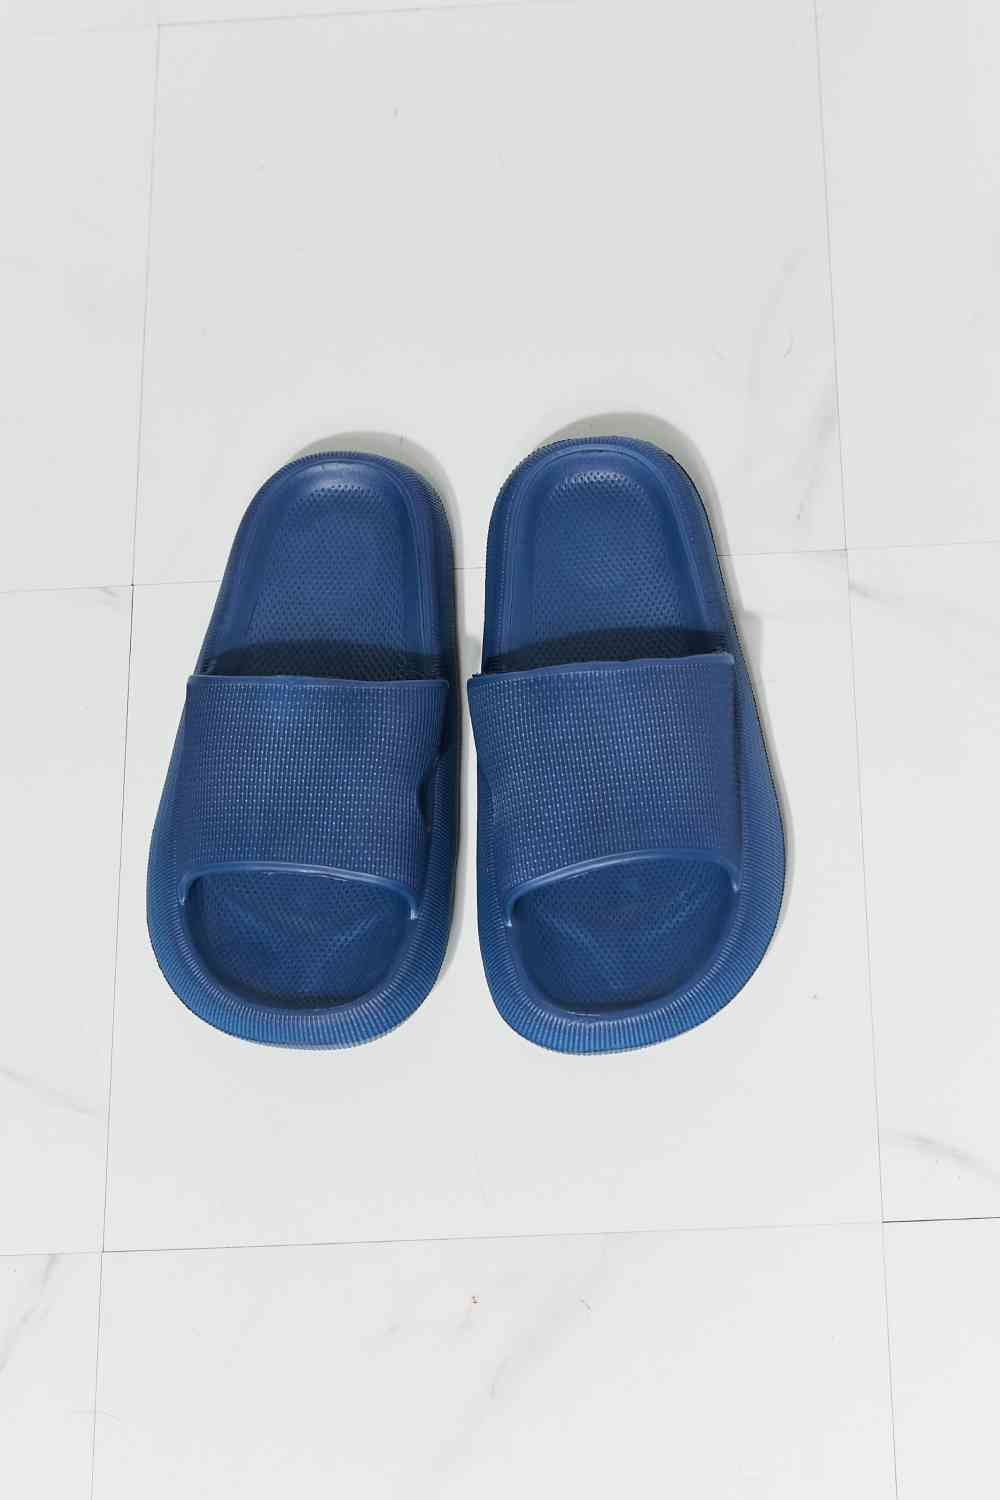 MMShoes Arms Around Me Open Toe Slide in Navy - Guy Christopher